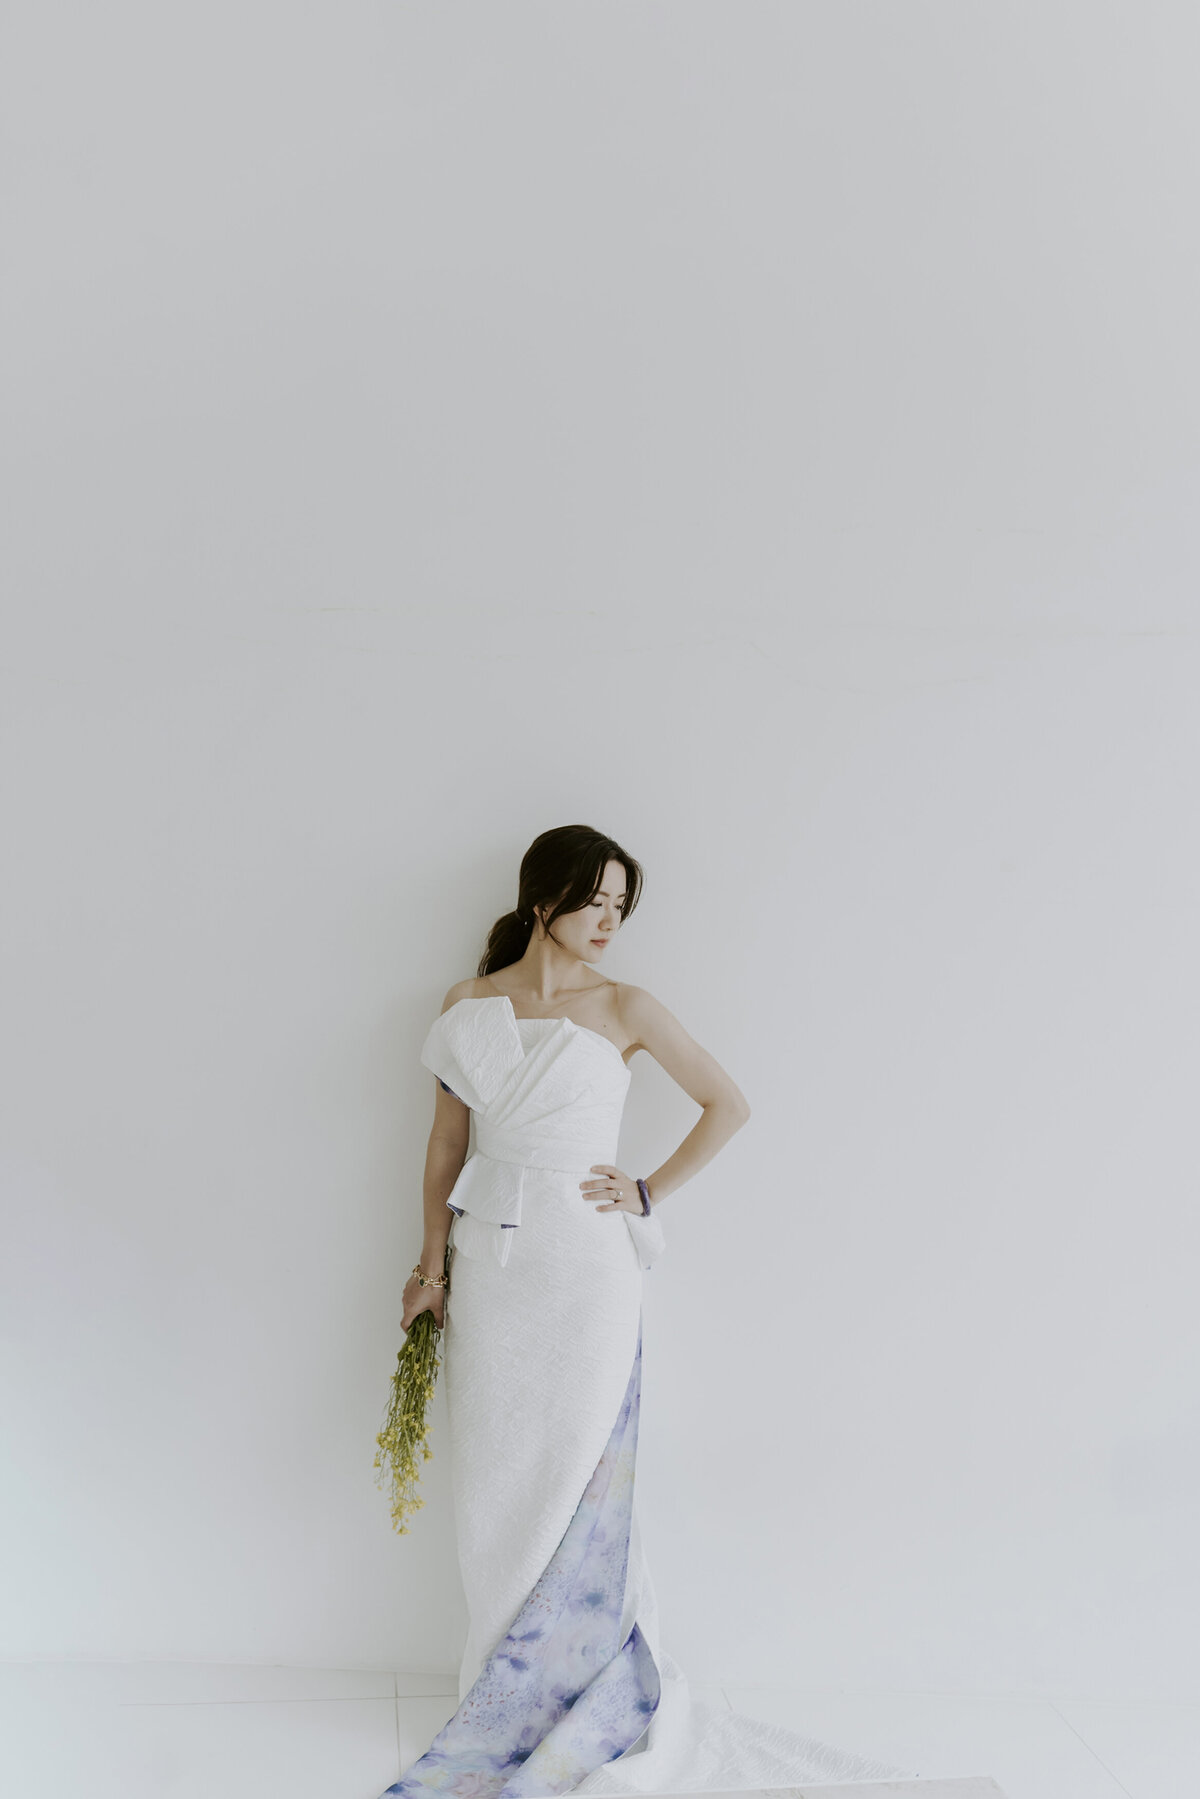 the bride wearing white tube long dress with purple details at the bottom while holding her fresh canola flowers leaning in a white wall